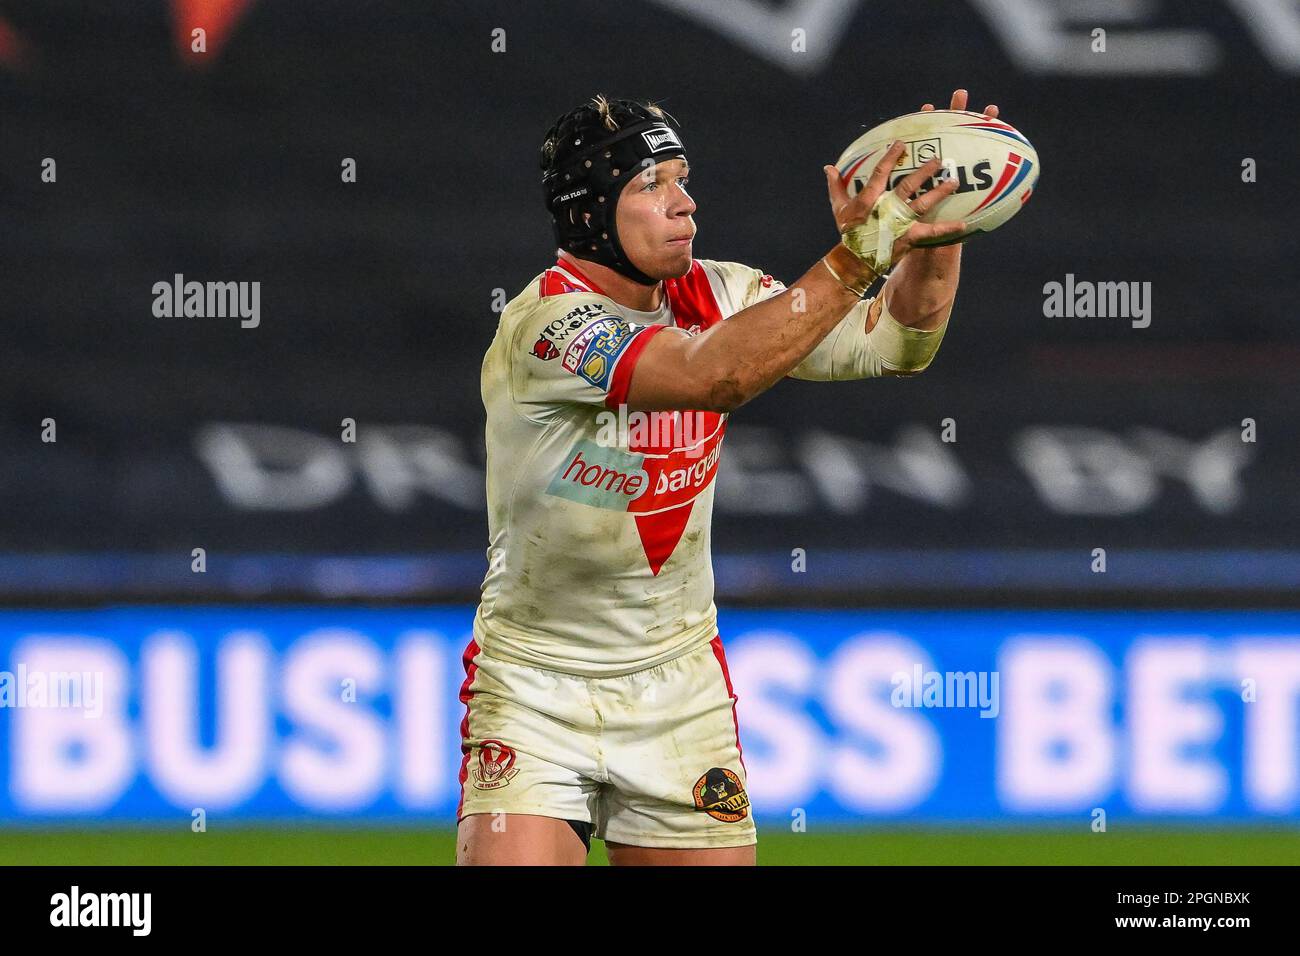 Jonny Lomax #6 of St Helens in action during the Betfred Super League Round 6 match Huddersfield Giants vs St Helens at John Smith's Stadium, Huddersfield, United Kingdom, 23rd March 2023  (Photo by Craig Thomas/News Images) Stock Photo